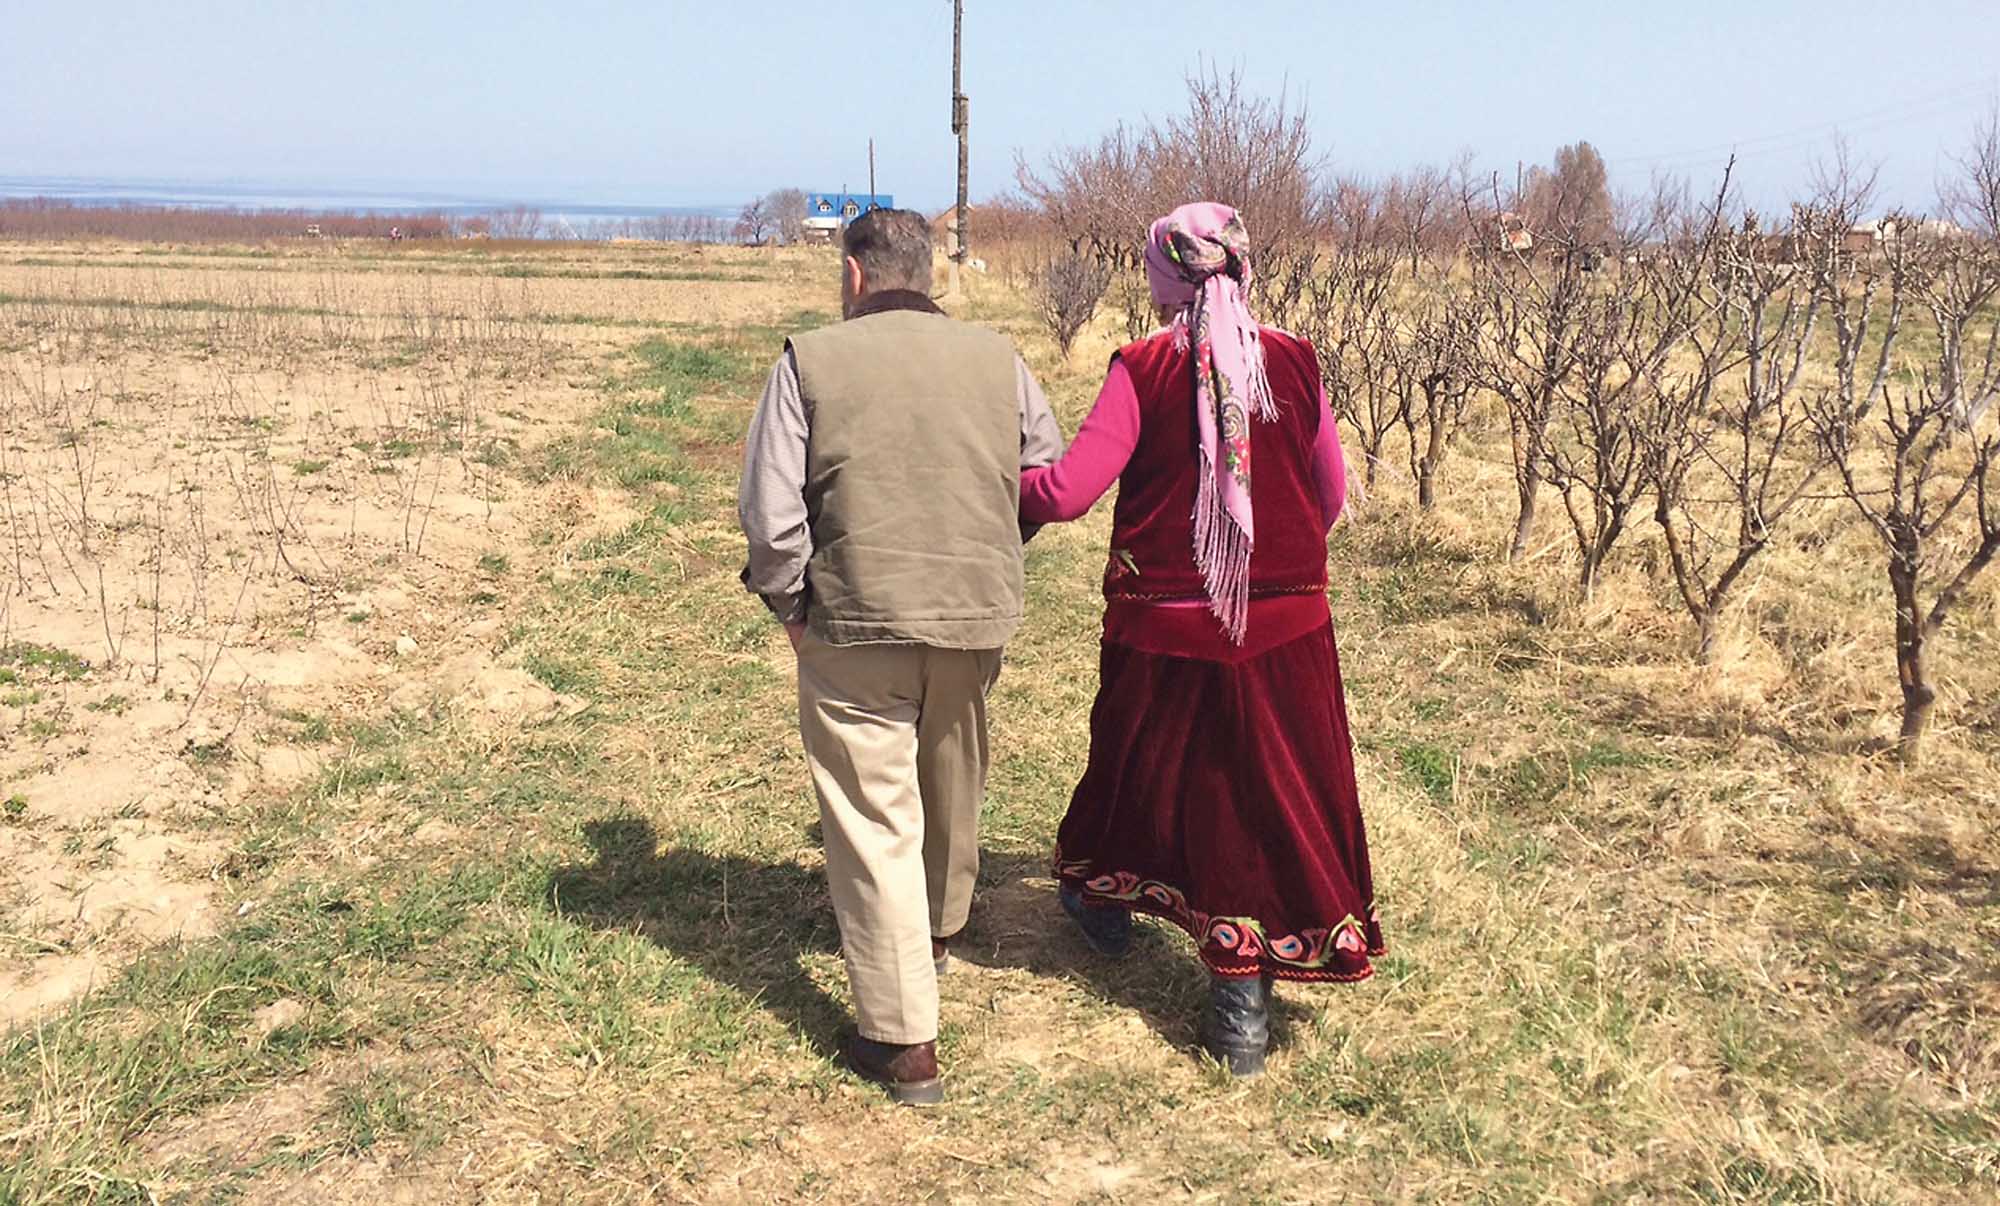 Cashmere orchardist Jim Koempel chats with Raisa Tologonova, an influential orchardist, breeder, and nursery owner in the Kyrgyz state of Issyk-Kul, who will be key in efforts to revive the region’s tree fruit industry. (Courtesy Randy Smith)